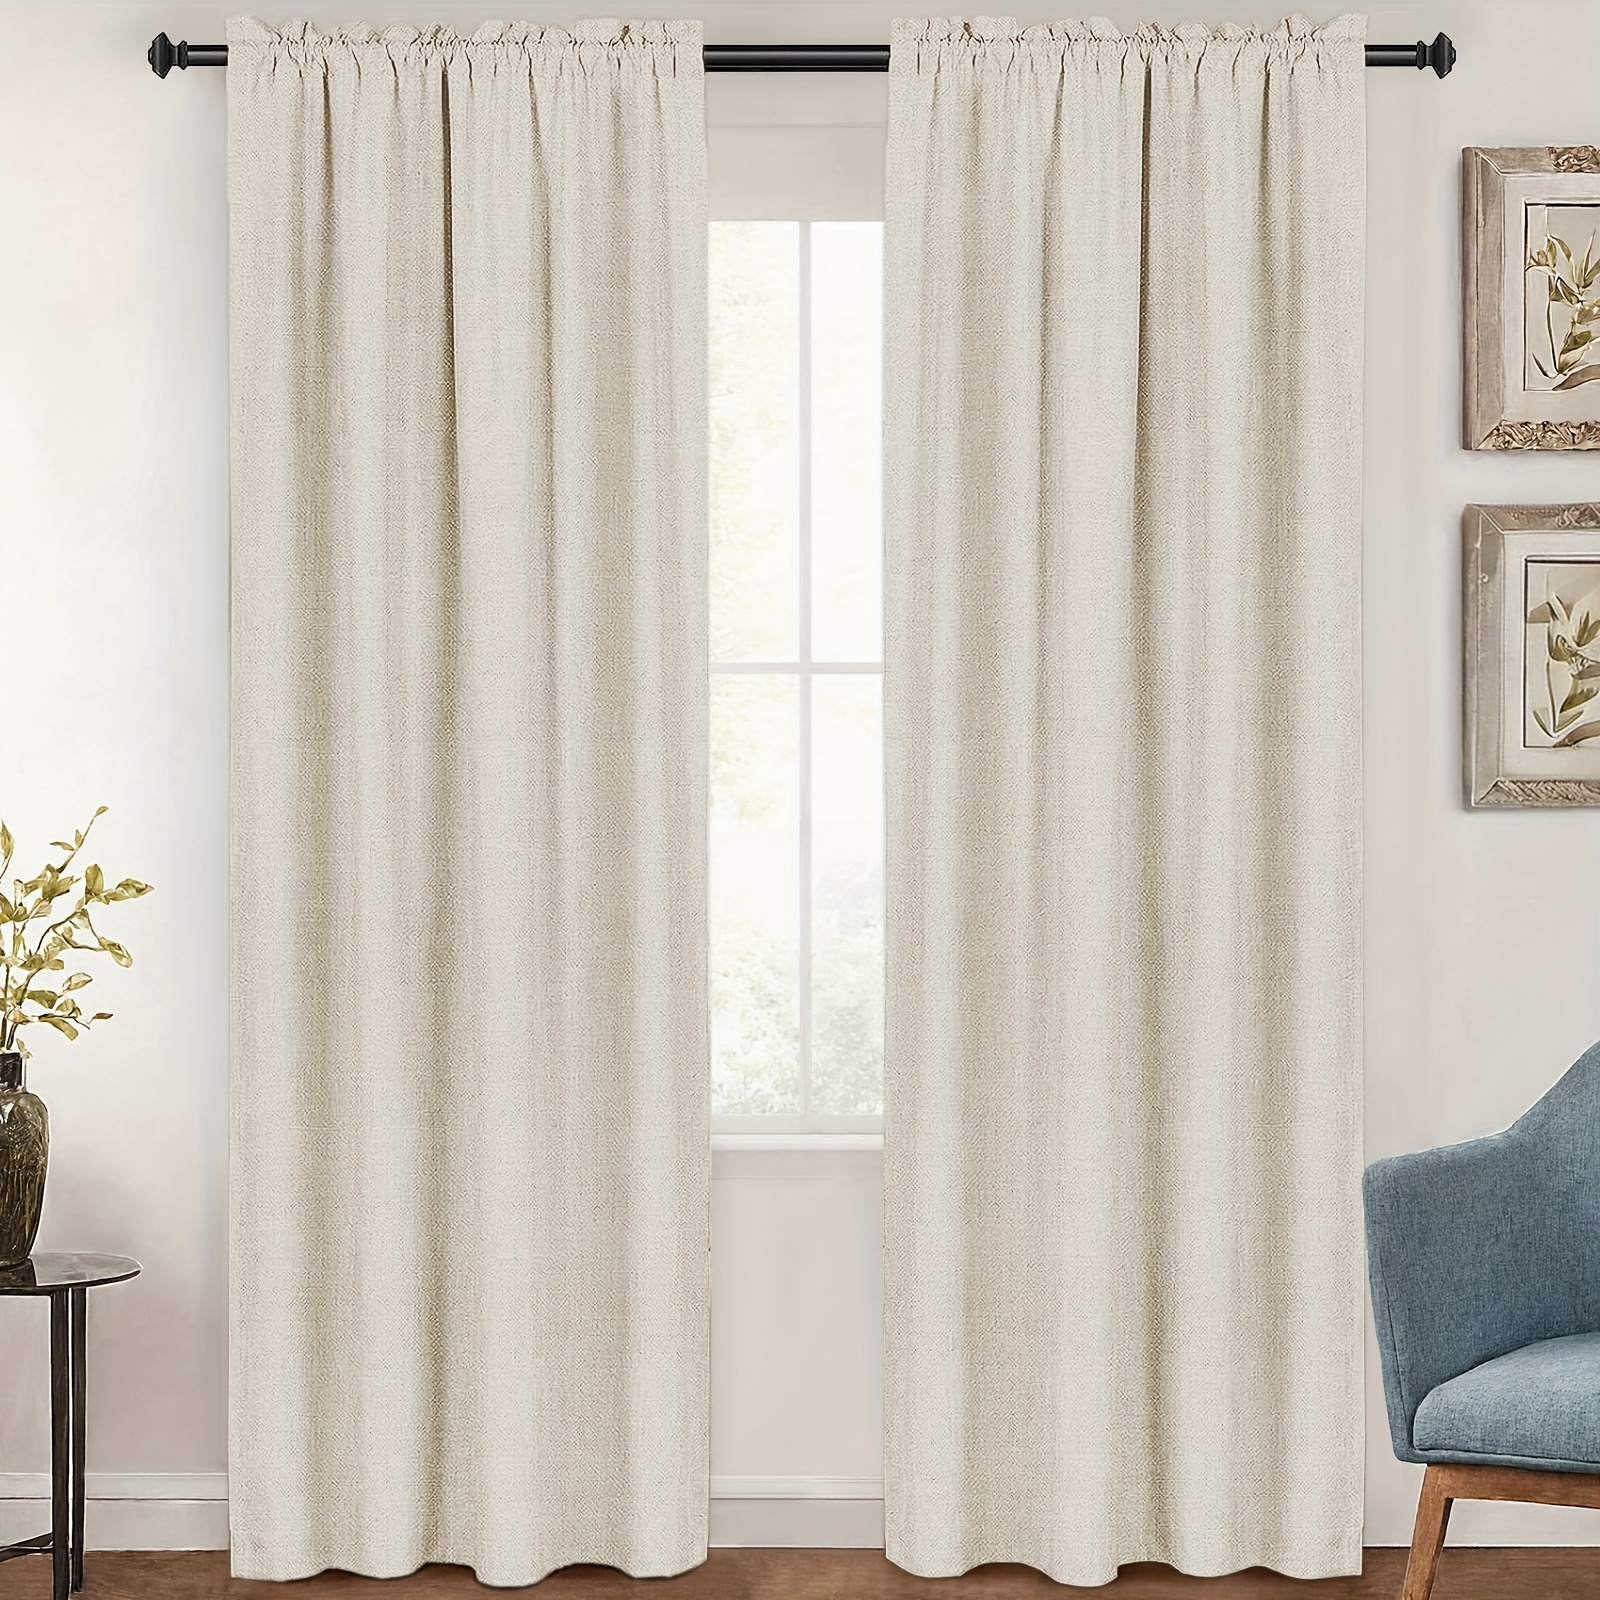 

2 Panels Linen Look 100% Blackout Curtains, 84 Inches Long For Bedroom, Full Light Blocking, Rod Pocket, Linen Textured Thick Window Curtain Drapes With Grey Backing